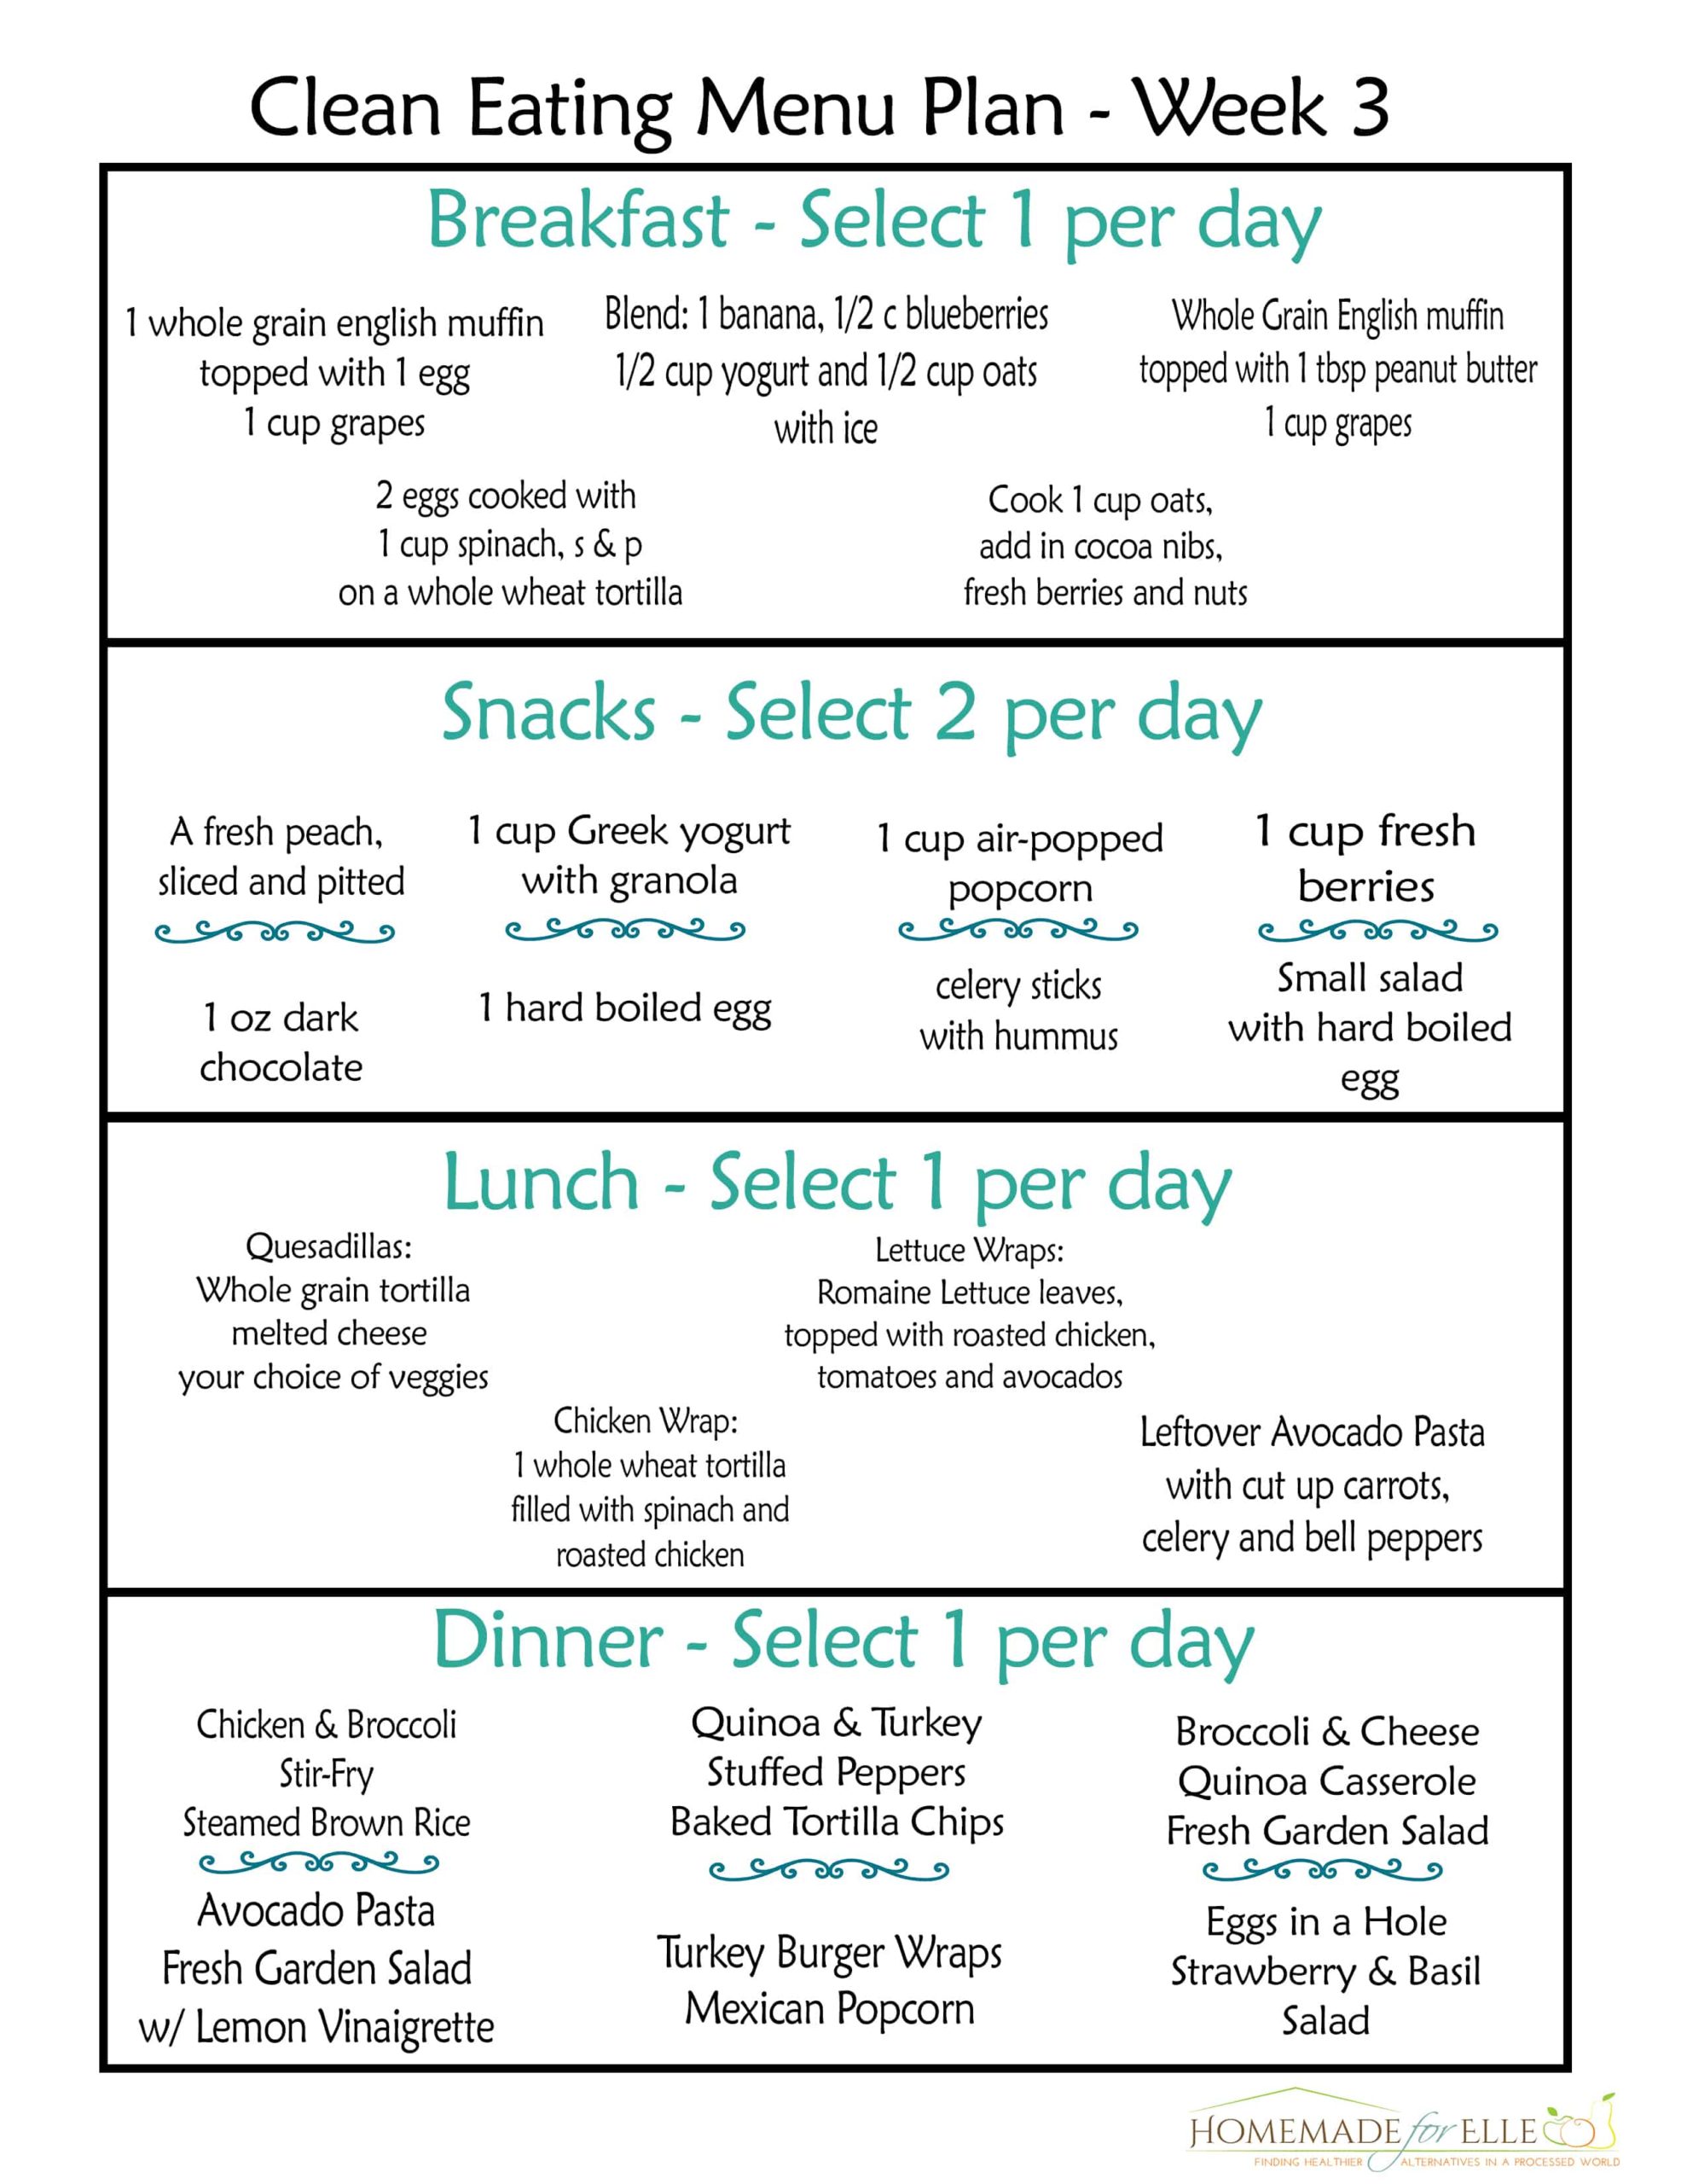 clean eating meal plan pdf with recipes your family will love homemade for elle